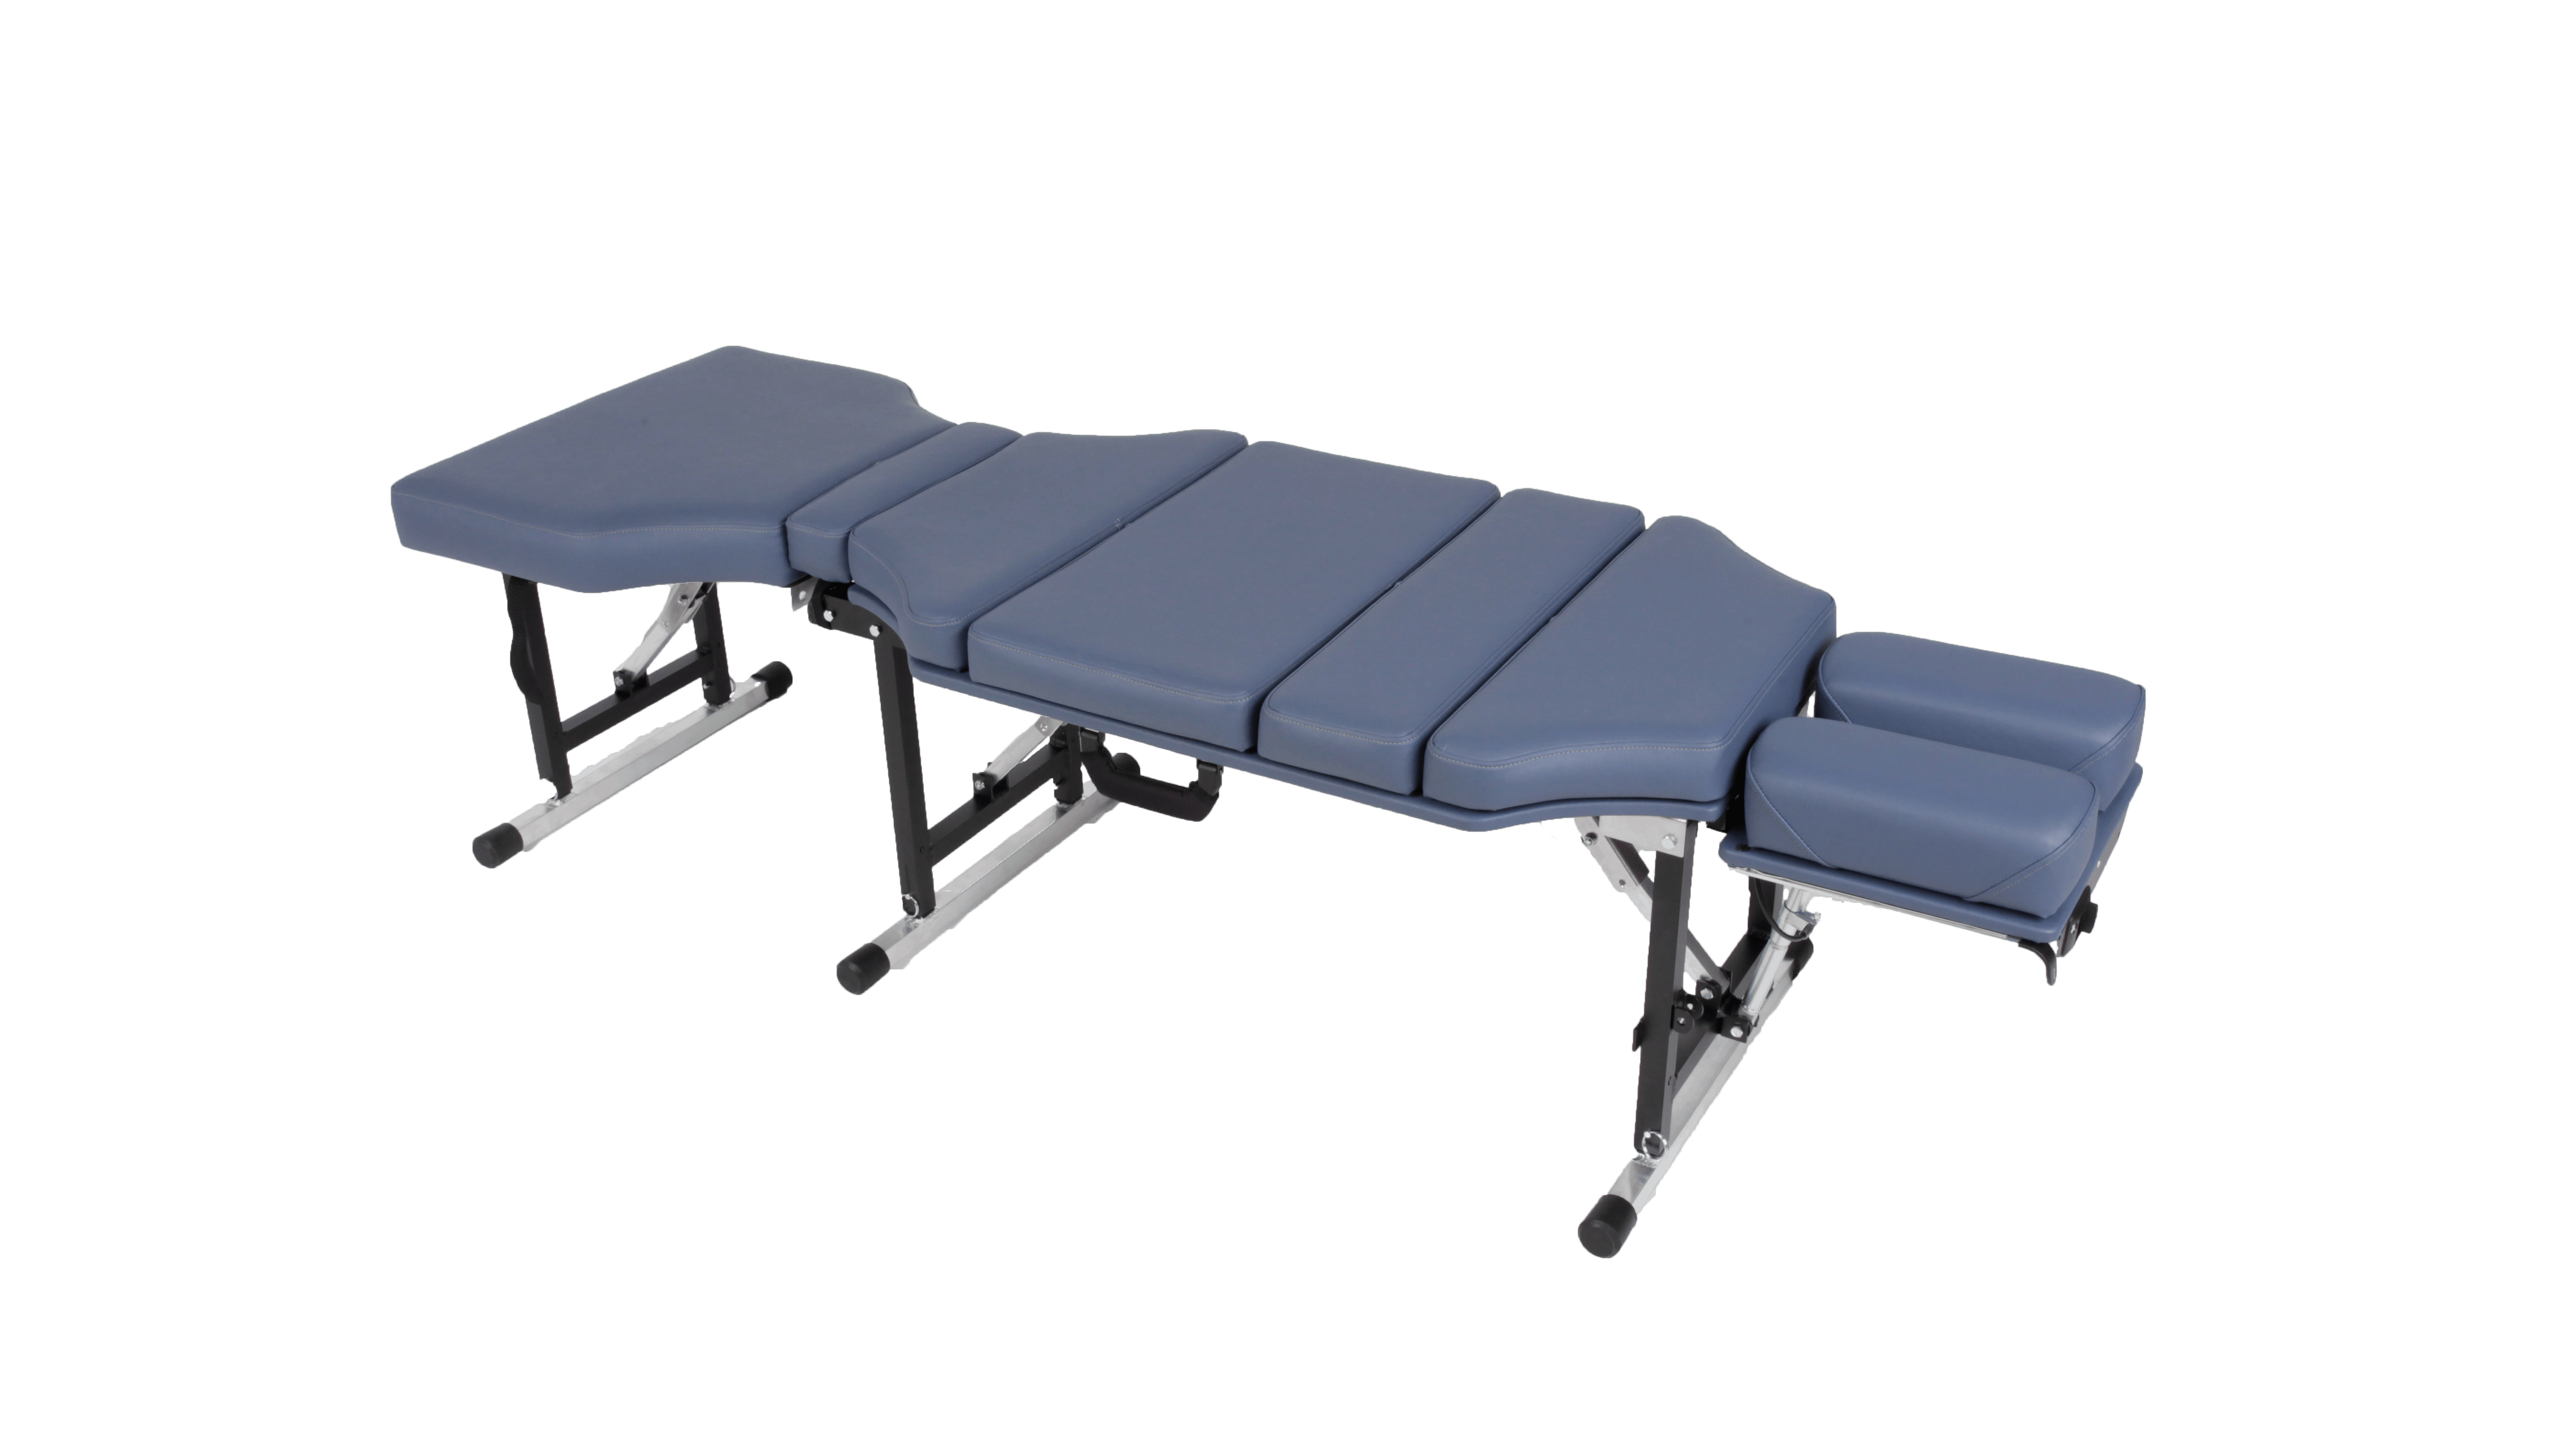 LT-1000 Portable Chiropractic Table